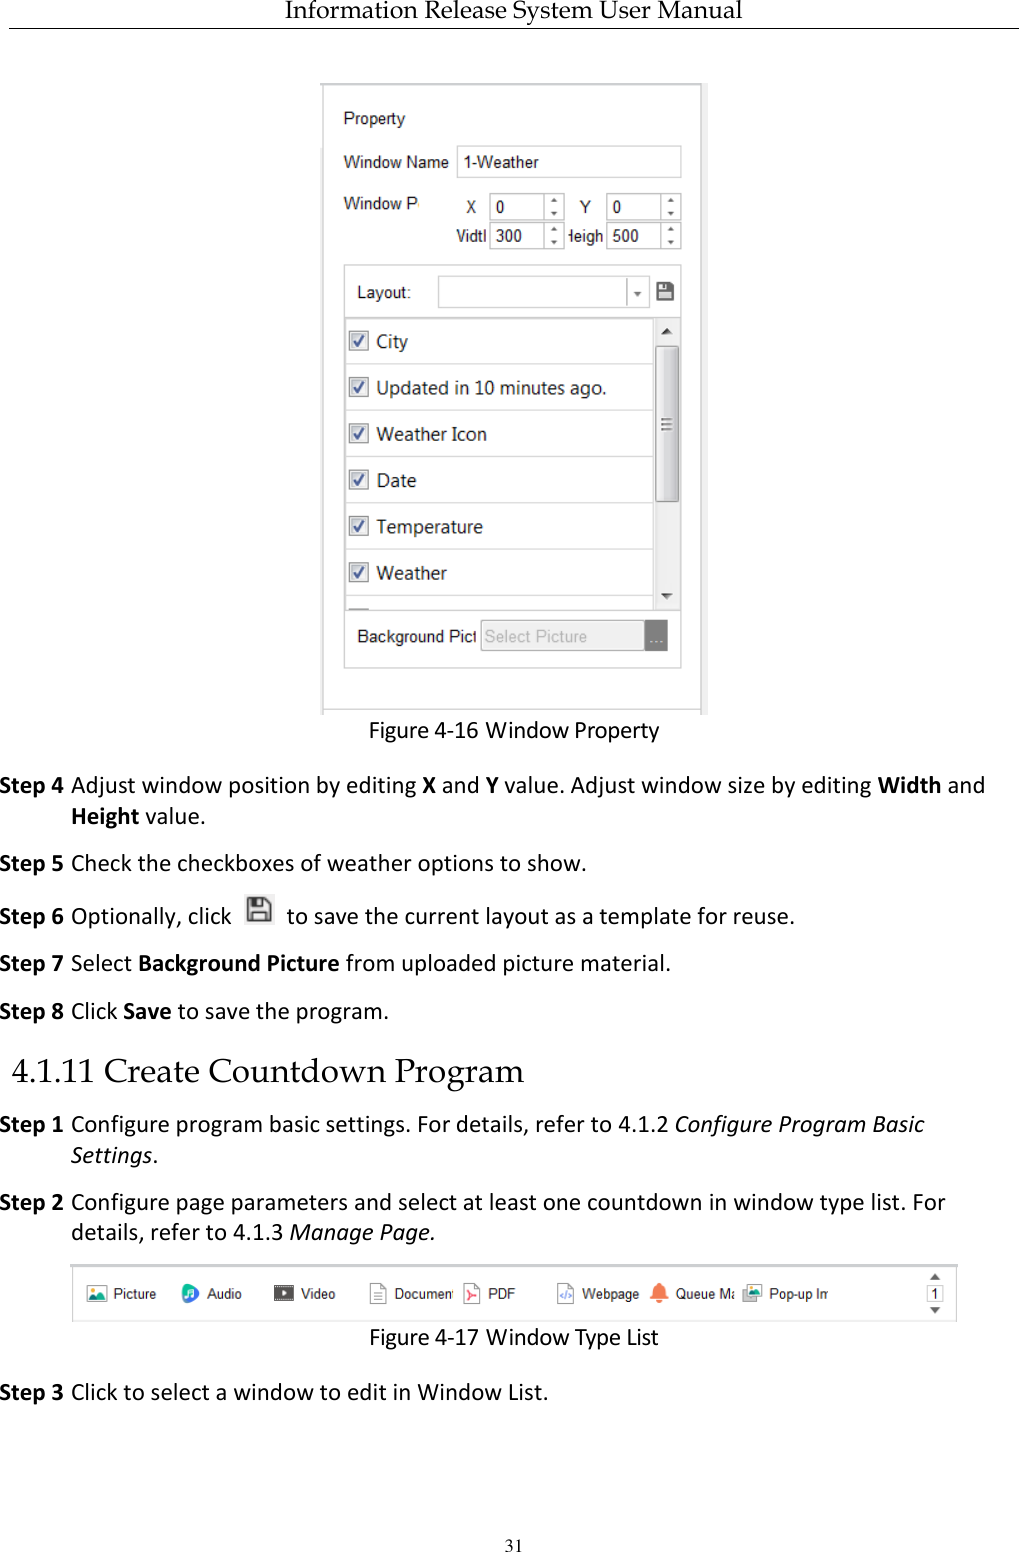 Information Release System User Manual 31  Figure 4-16 Window Property Step 4 Adjust window position by editing X and Y value. Adjust window size by editing Width and Height value. Step 5 Check the checkboxes of weather options to show. Step 6 Optionally, click    to save the current layout as a template for reuse. Step 7 Select Background Picture from uploaded picture material. Step 8 Click Save to save the program. 4.1.11 Create Countdown Program Step 1 Configure program basic settings. For details, refer to 4.1.2 Configure Program Basic Settings. Step 2 Configure page parameters and select at least one countdown in window type list. For details, refer to 4.1.3 Manage Page.  Figure 4-17 Window Type List Step 3 Click to select a window to edit in Window List. 